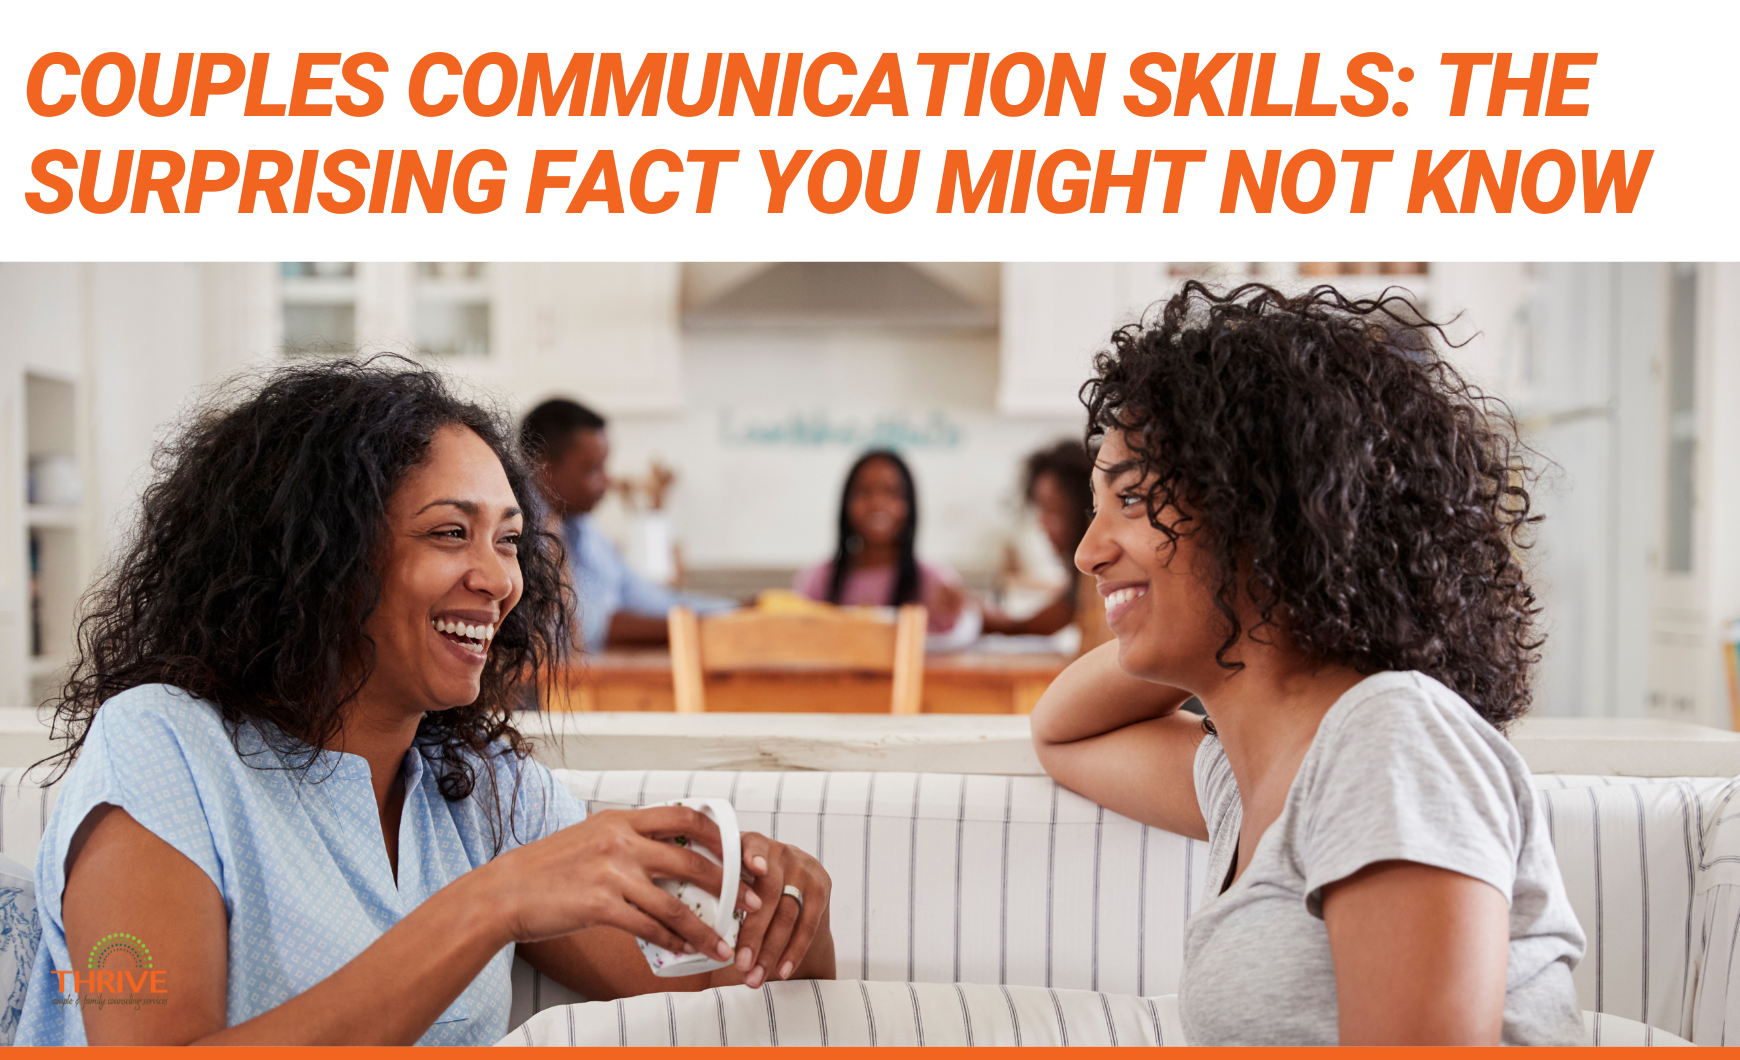 Orange text that reads "Couples Communication Skills: The Surprising Fact You Might Not Know" above a photo of two Black women sitting next to each other on a couch. They are both smiling. behind them is a kitchen where some kids are sitting.